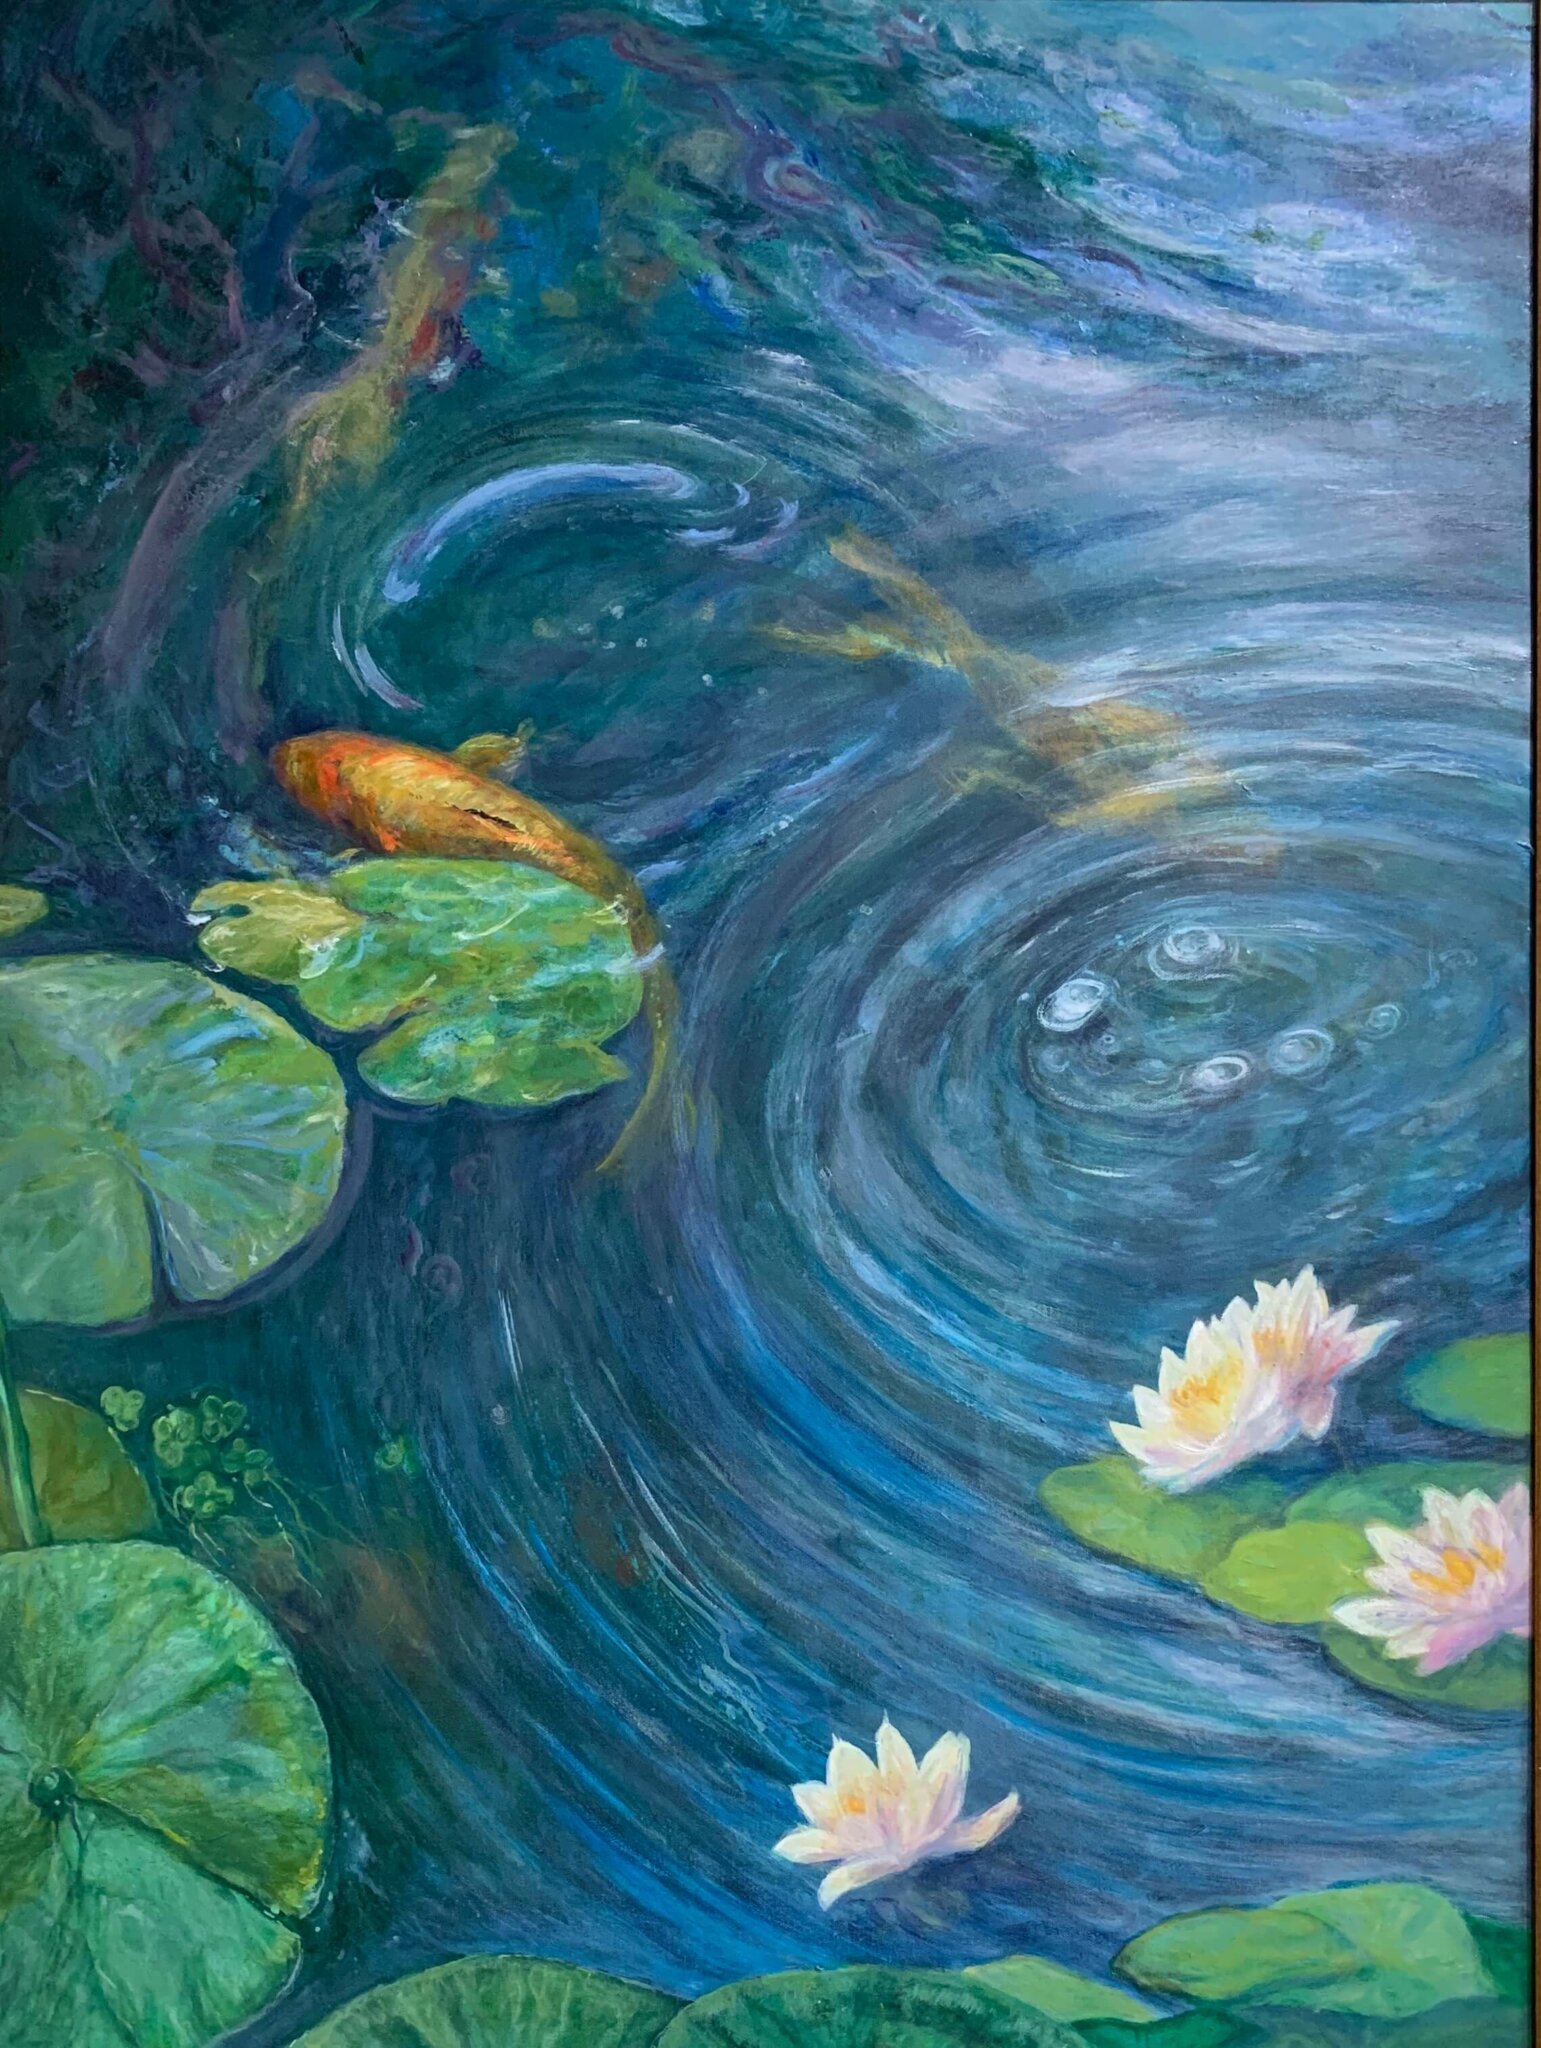 A freshwater painting by Diane Alec Smith